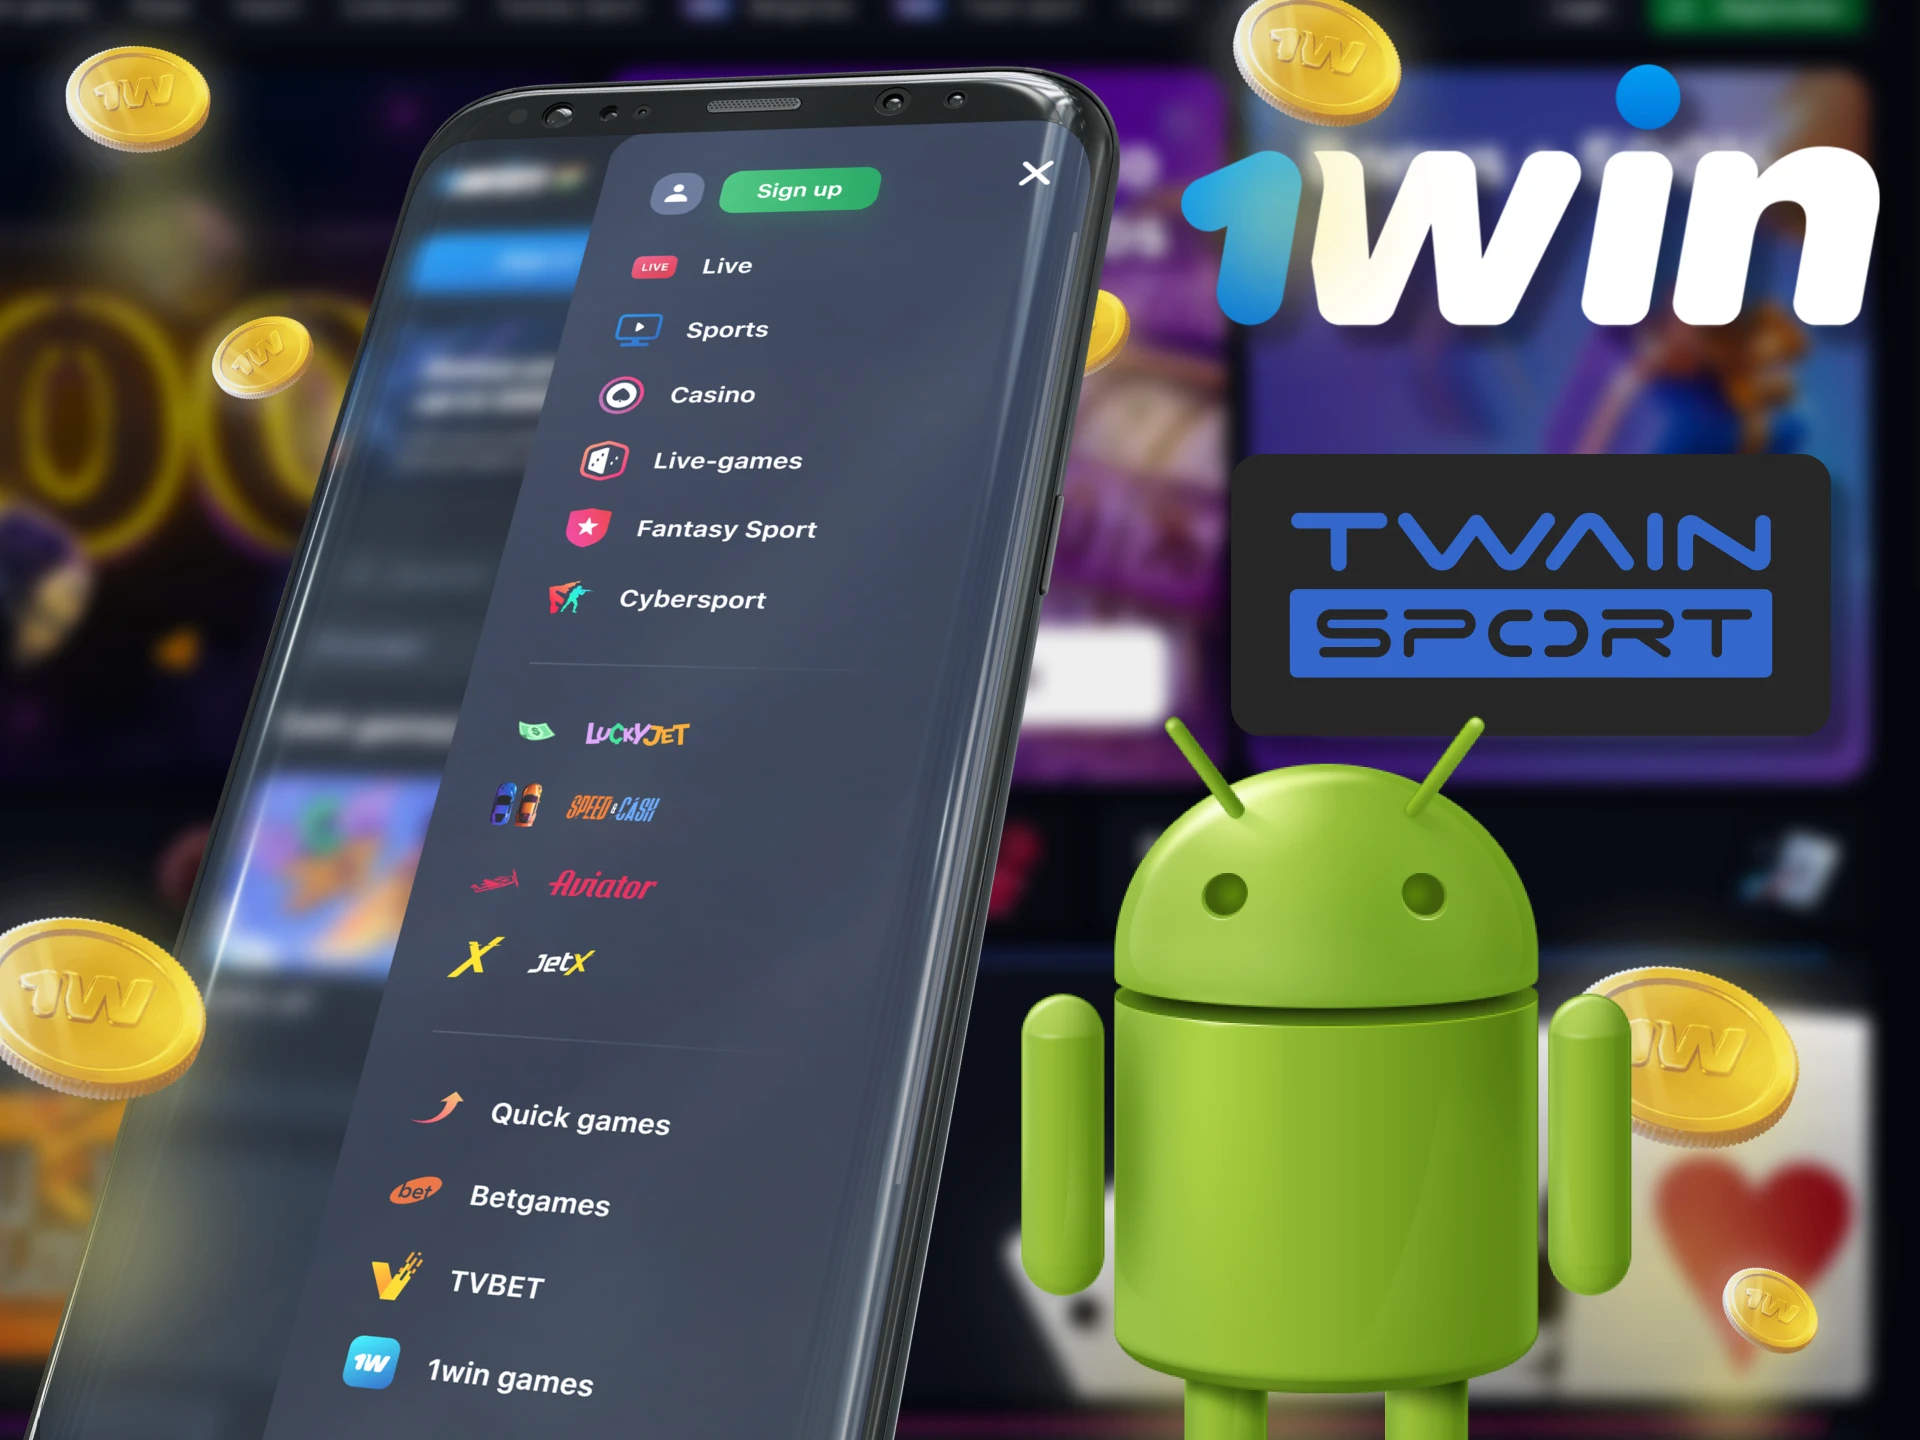 Place 1Win bets on Twain Sport anywhere from your Android phone.